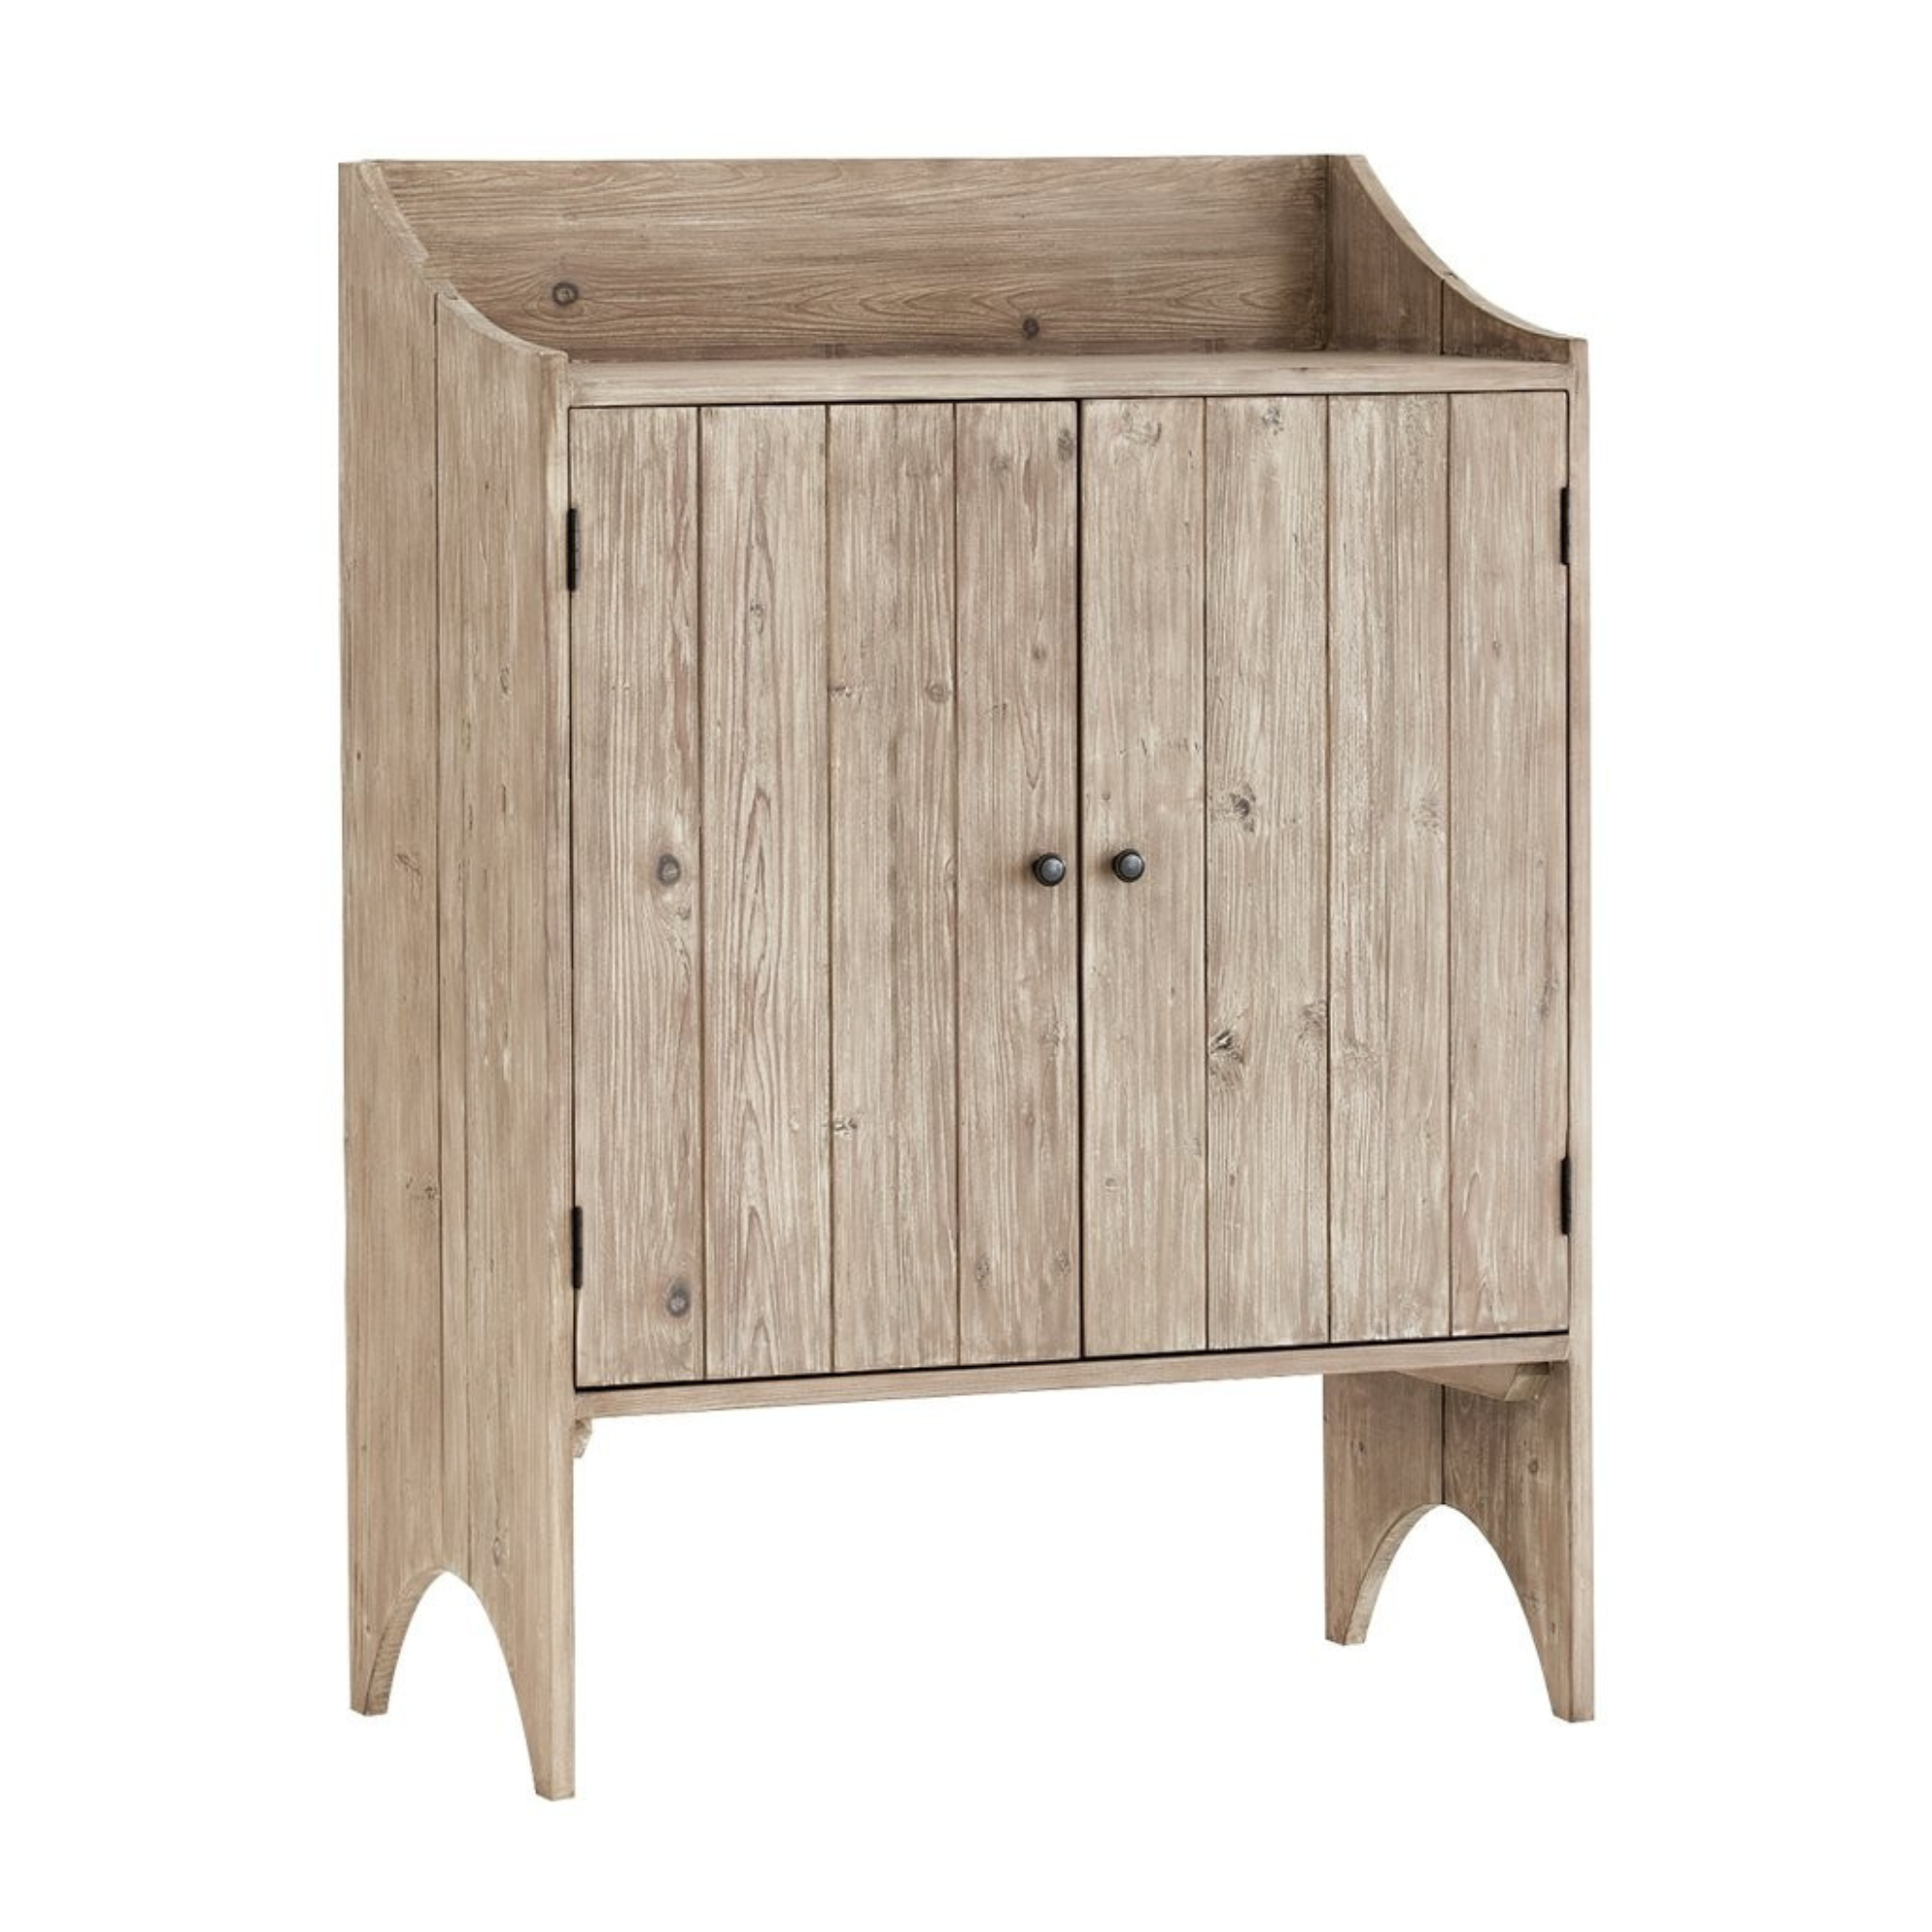 VALLE SMALL CABINET - NATURAL